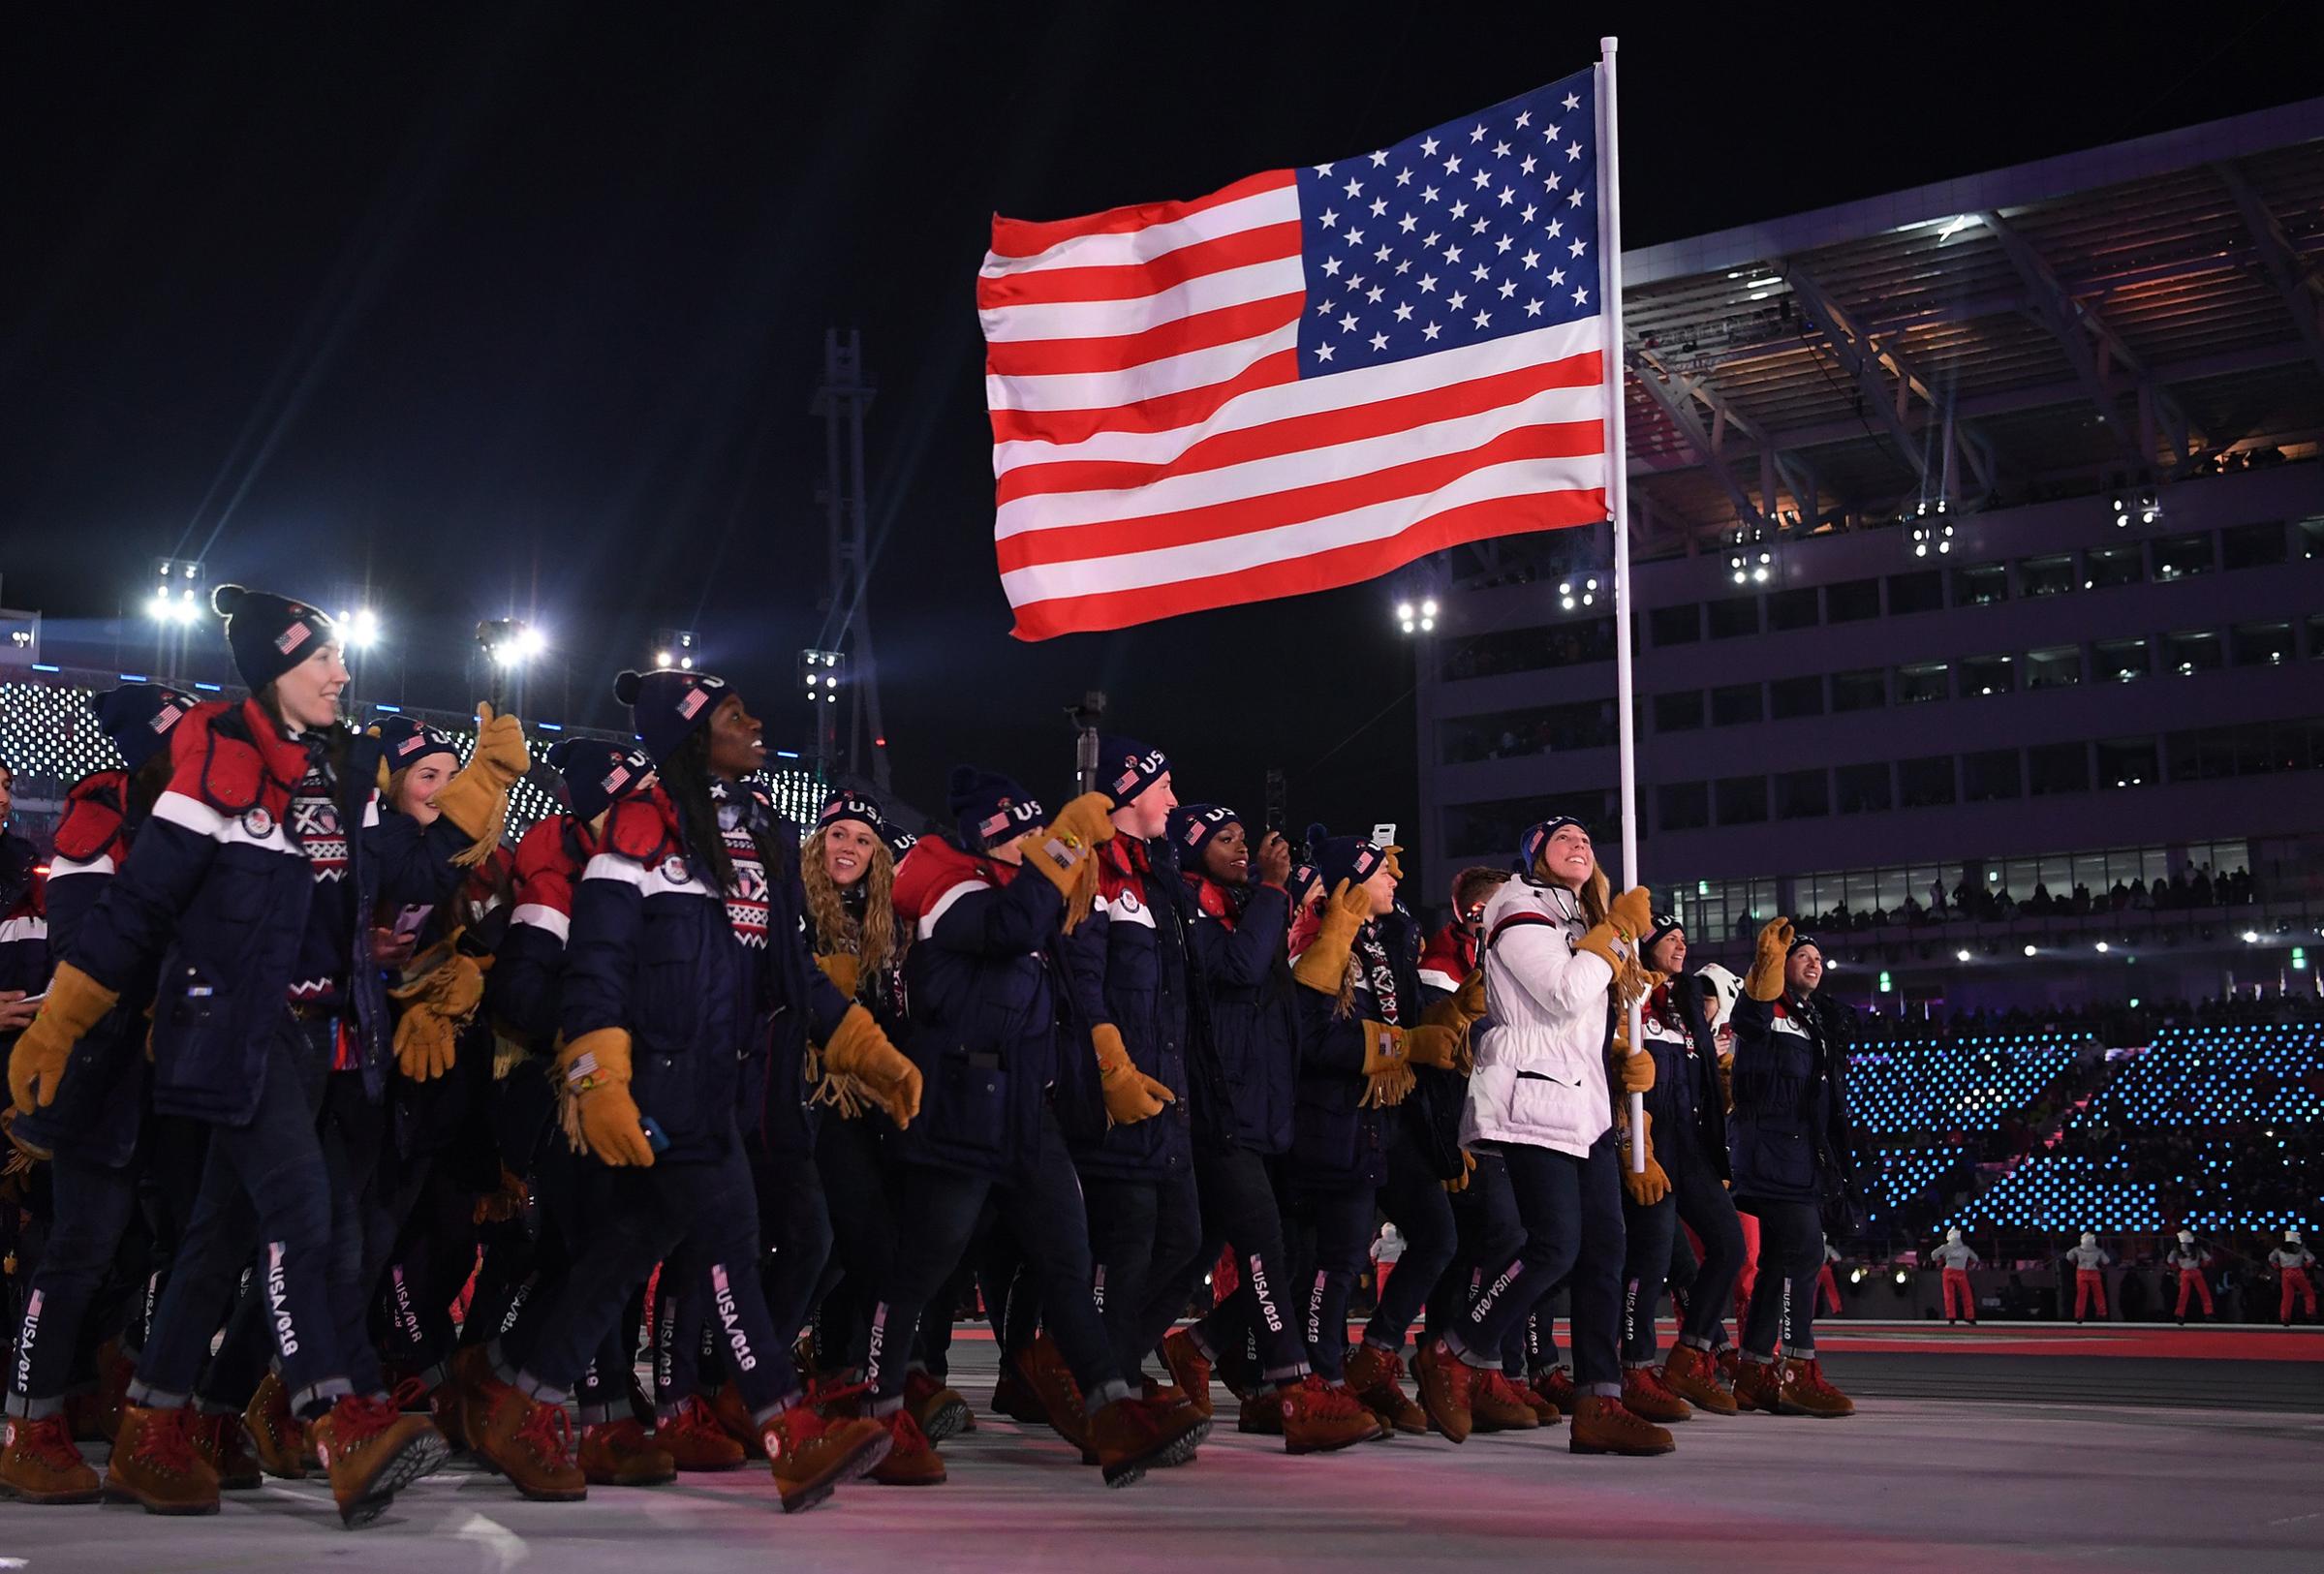 Flag bearer Erin Hamlin of the United States leads the team in the Parade of Athletes during the Opening Ceremony of the PyeongChang 2018 Winter Olympic Games.